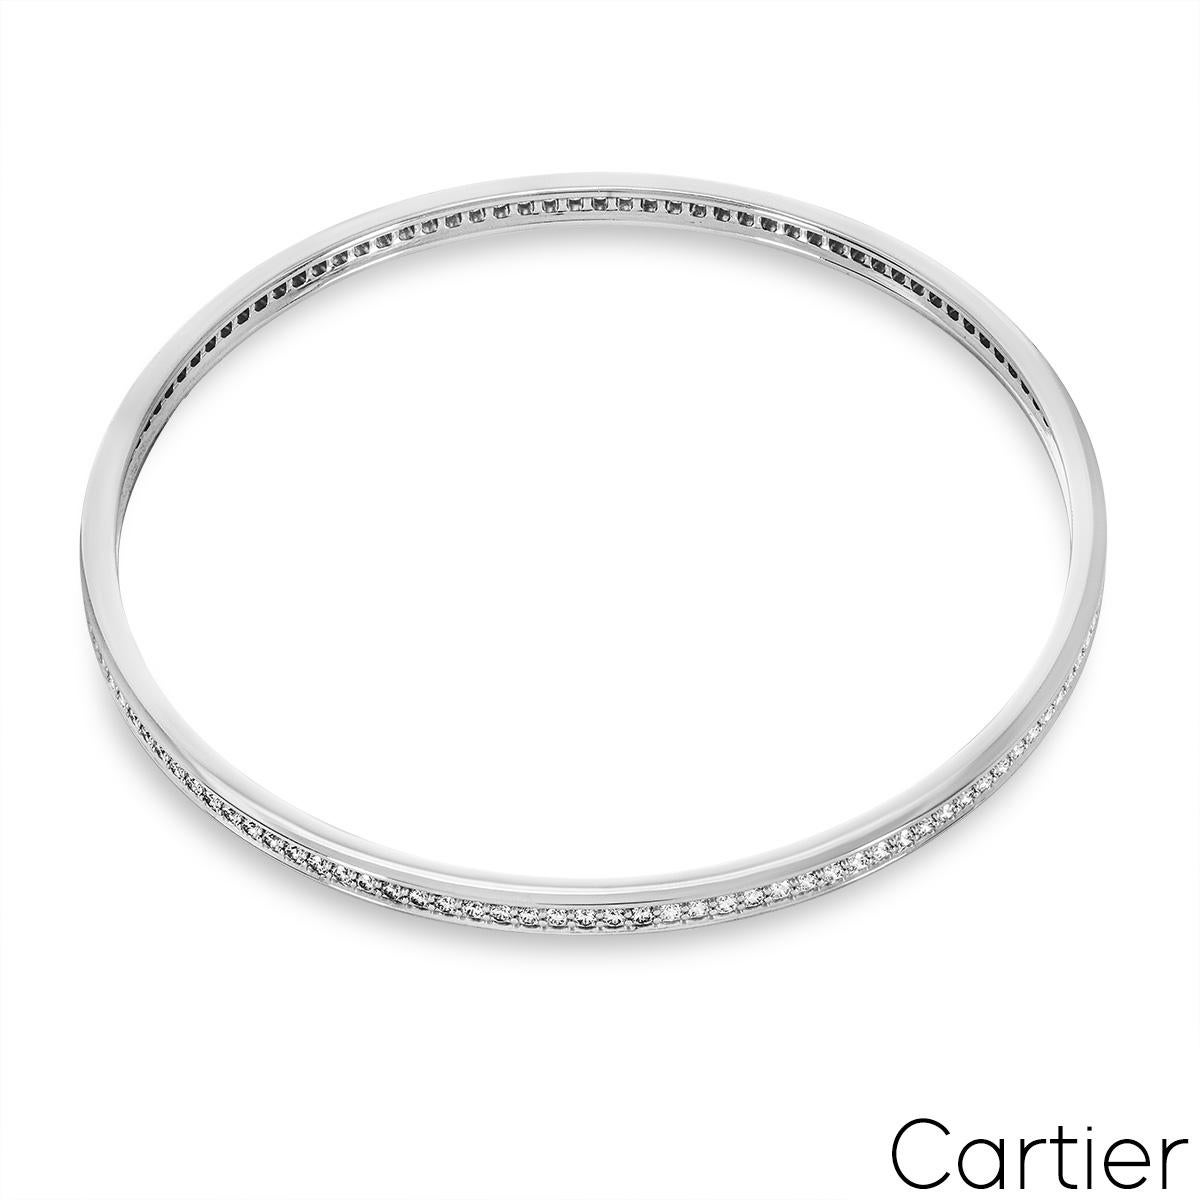 Cartier White Gold Diamond Bangle 2.90TDW In Excellent Condition For Sale In London, GB